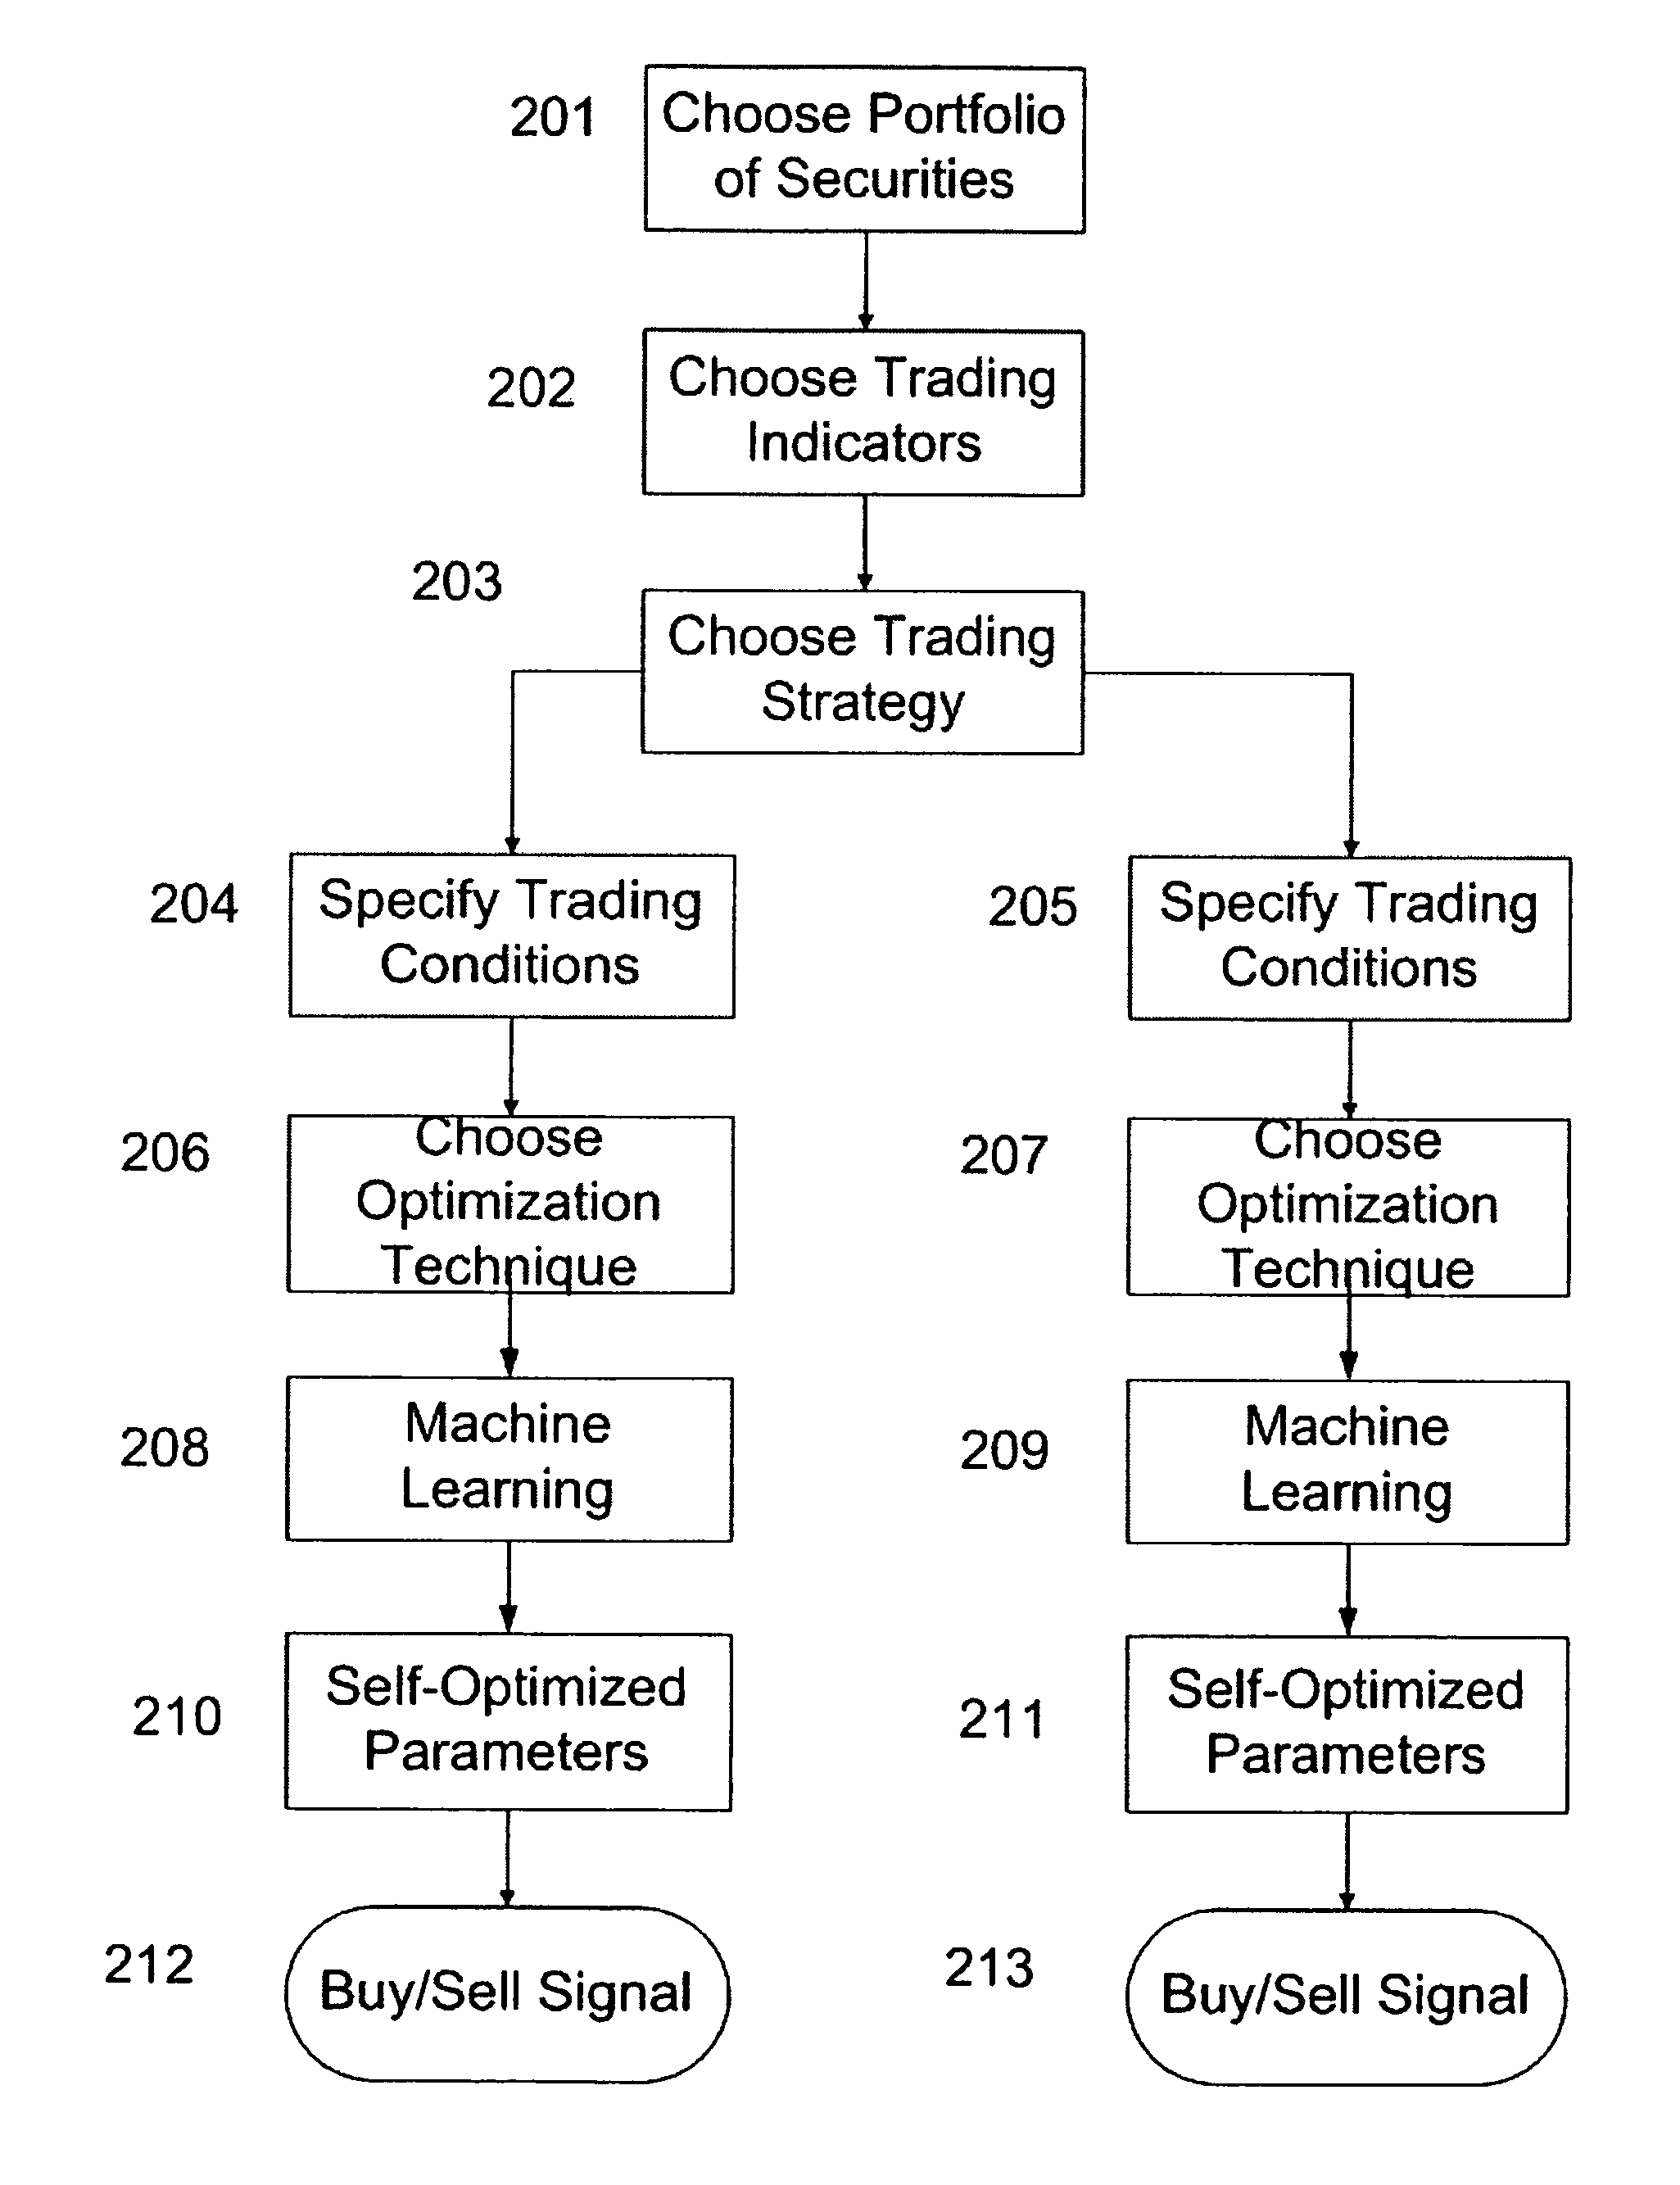 Machine learning automatic order transmission system for sending self-optimized trading signals